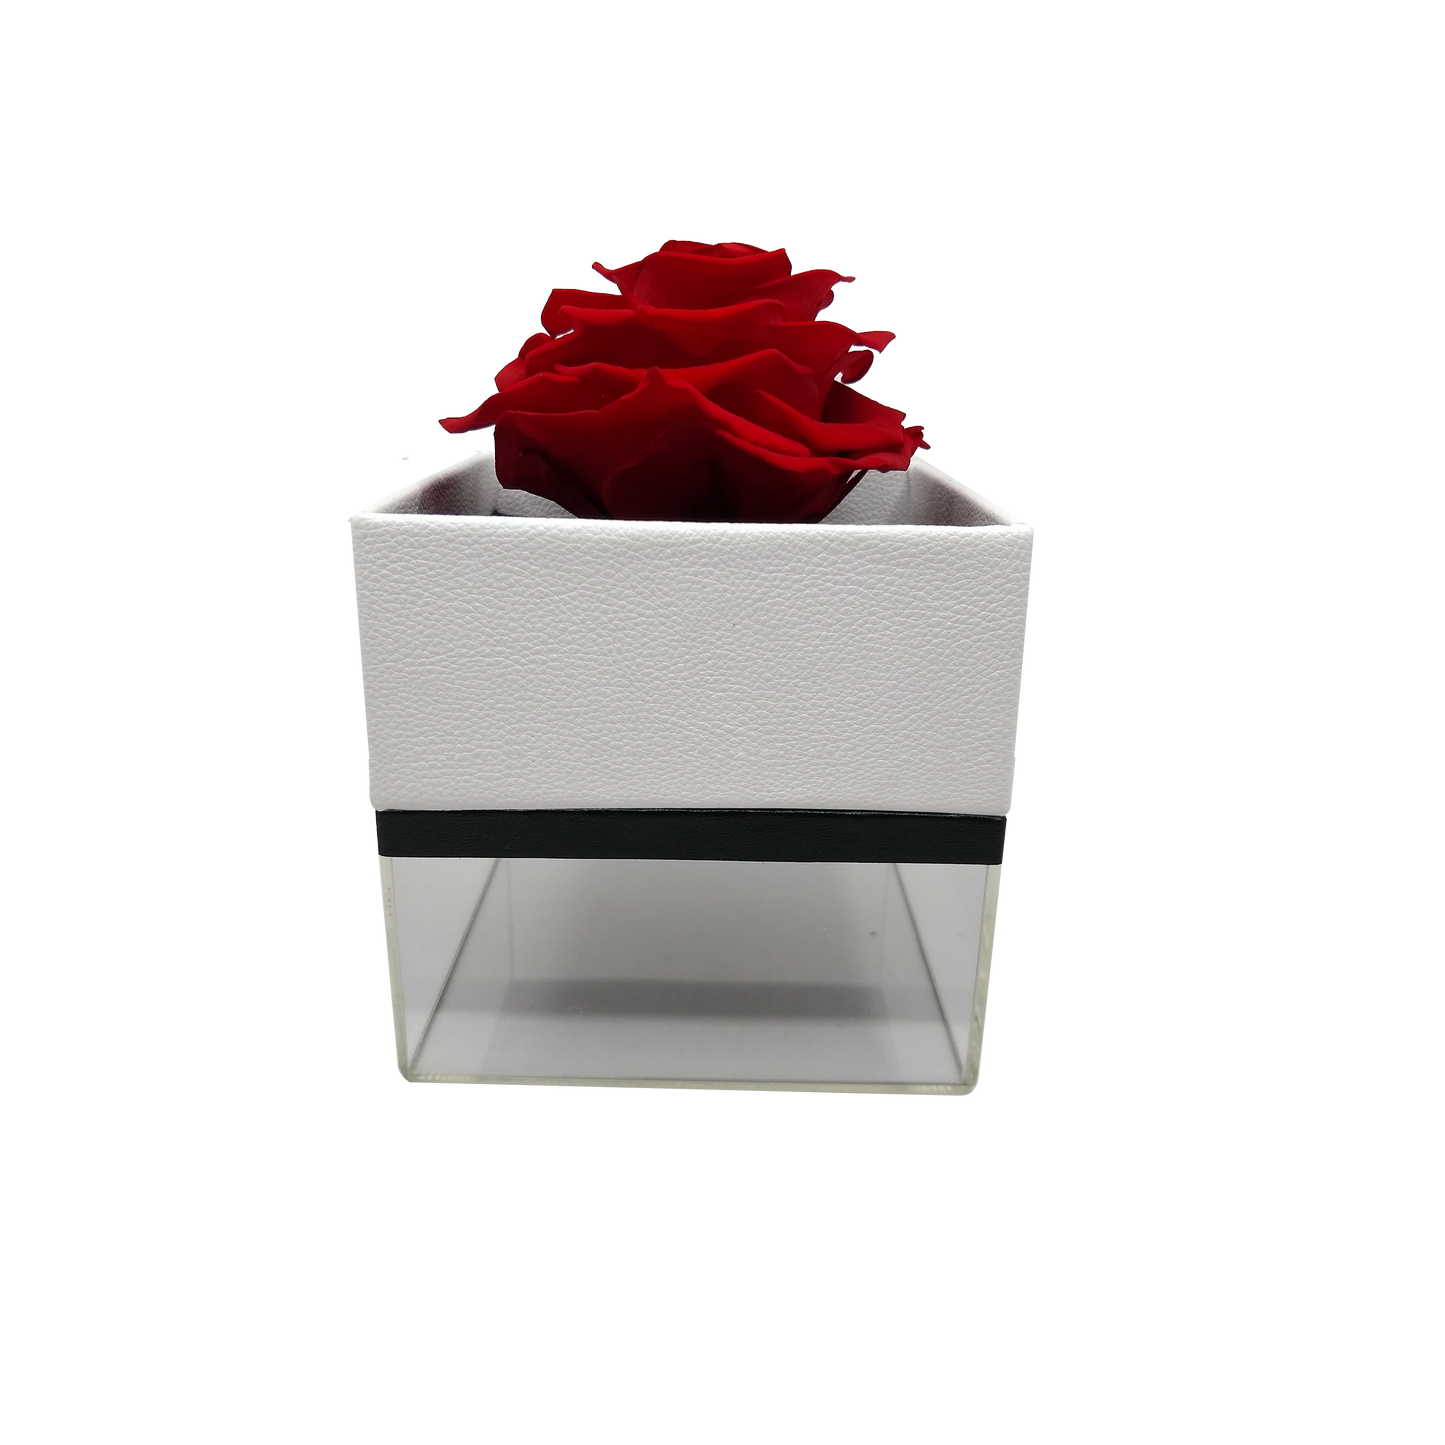 LUXURY 1 PRESERVED ROSE ARRANGEMENT - SQUARE ACRYLIC AND PU BOX